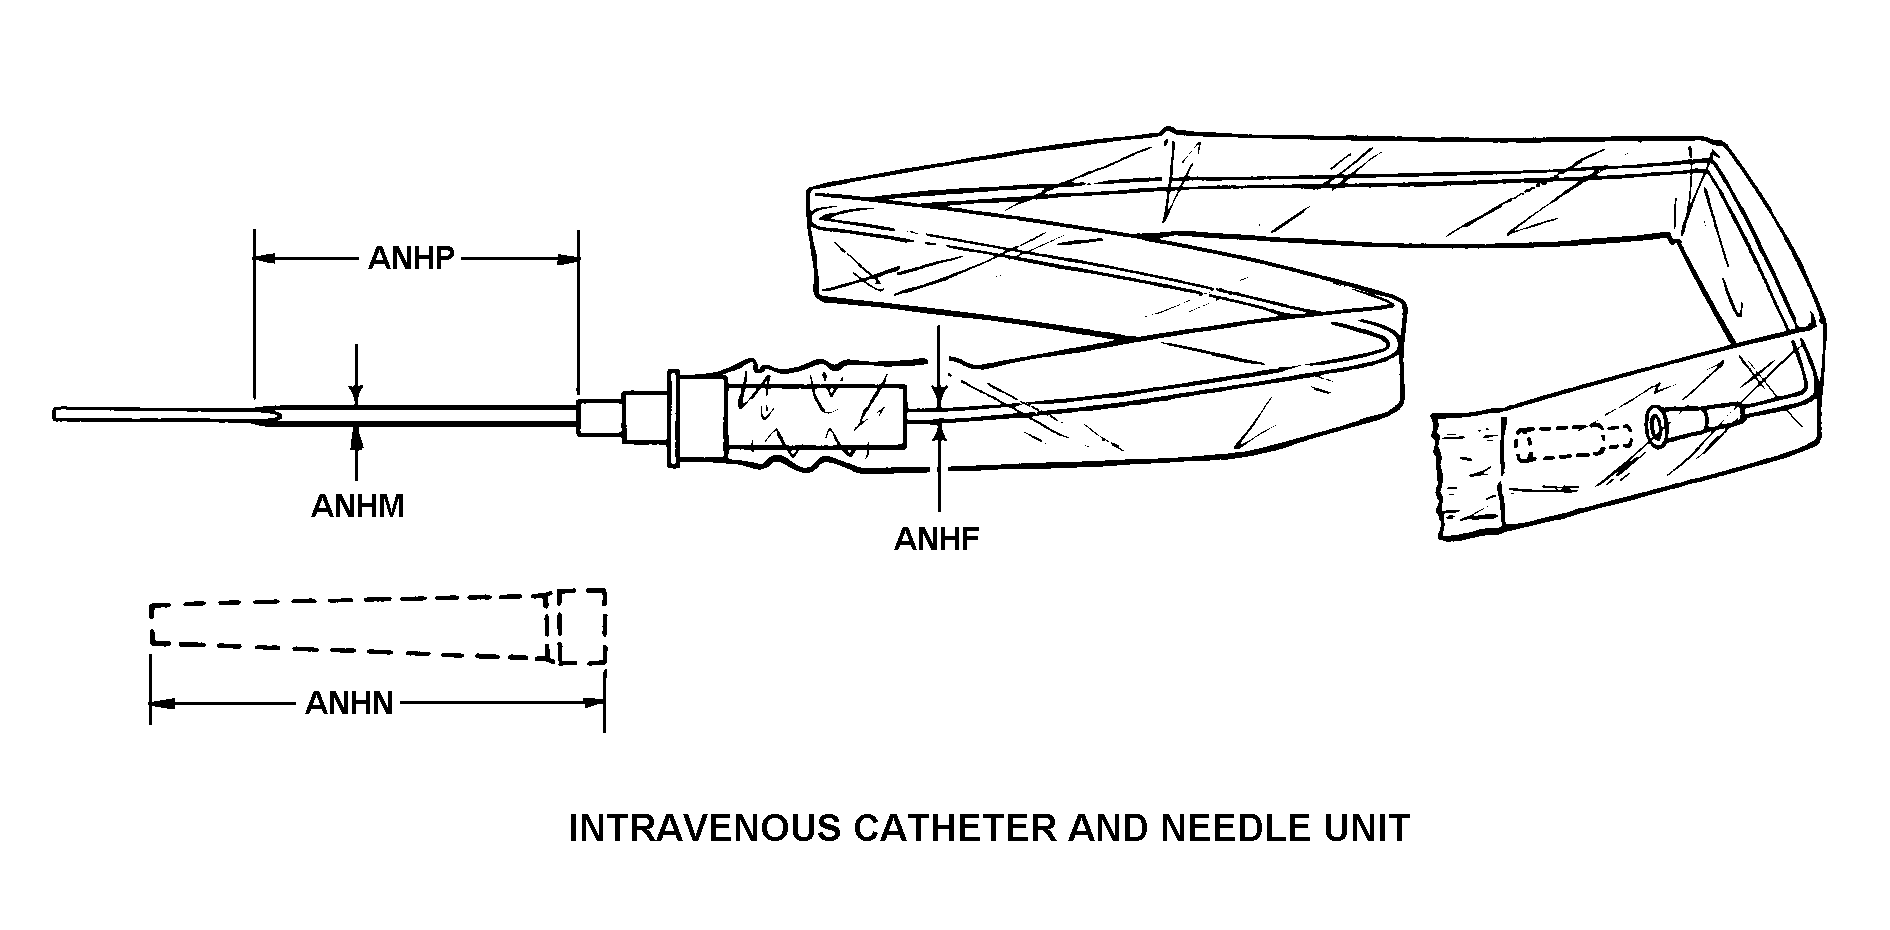 INTRAVENOUS CATHETER AND NEEDLE UNIT style nsn 6515-01-210-7838